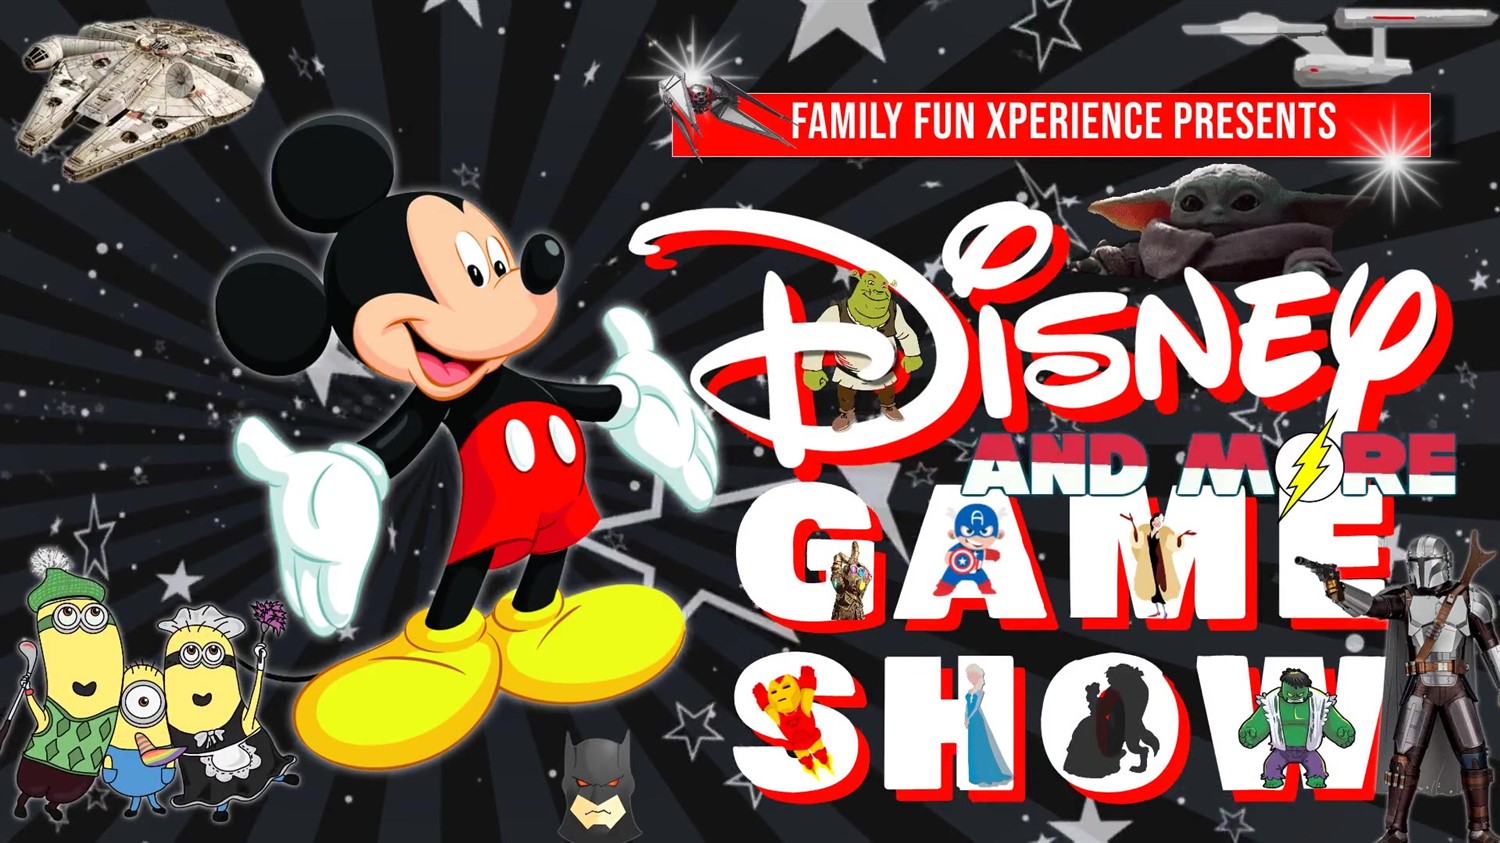 DISNEY & MORE GAME SHOW Animation, movies, sci-fi, superheroes, & much more! on Jul 19, 19:00@FFX Theatre - Pick a seat, Buy tickets and Get information on Family Fun Xperience tickets.ffxshow.org